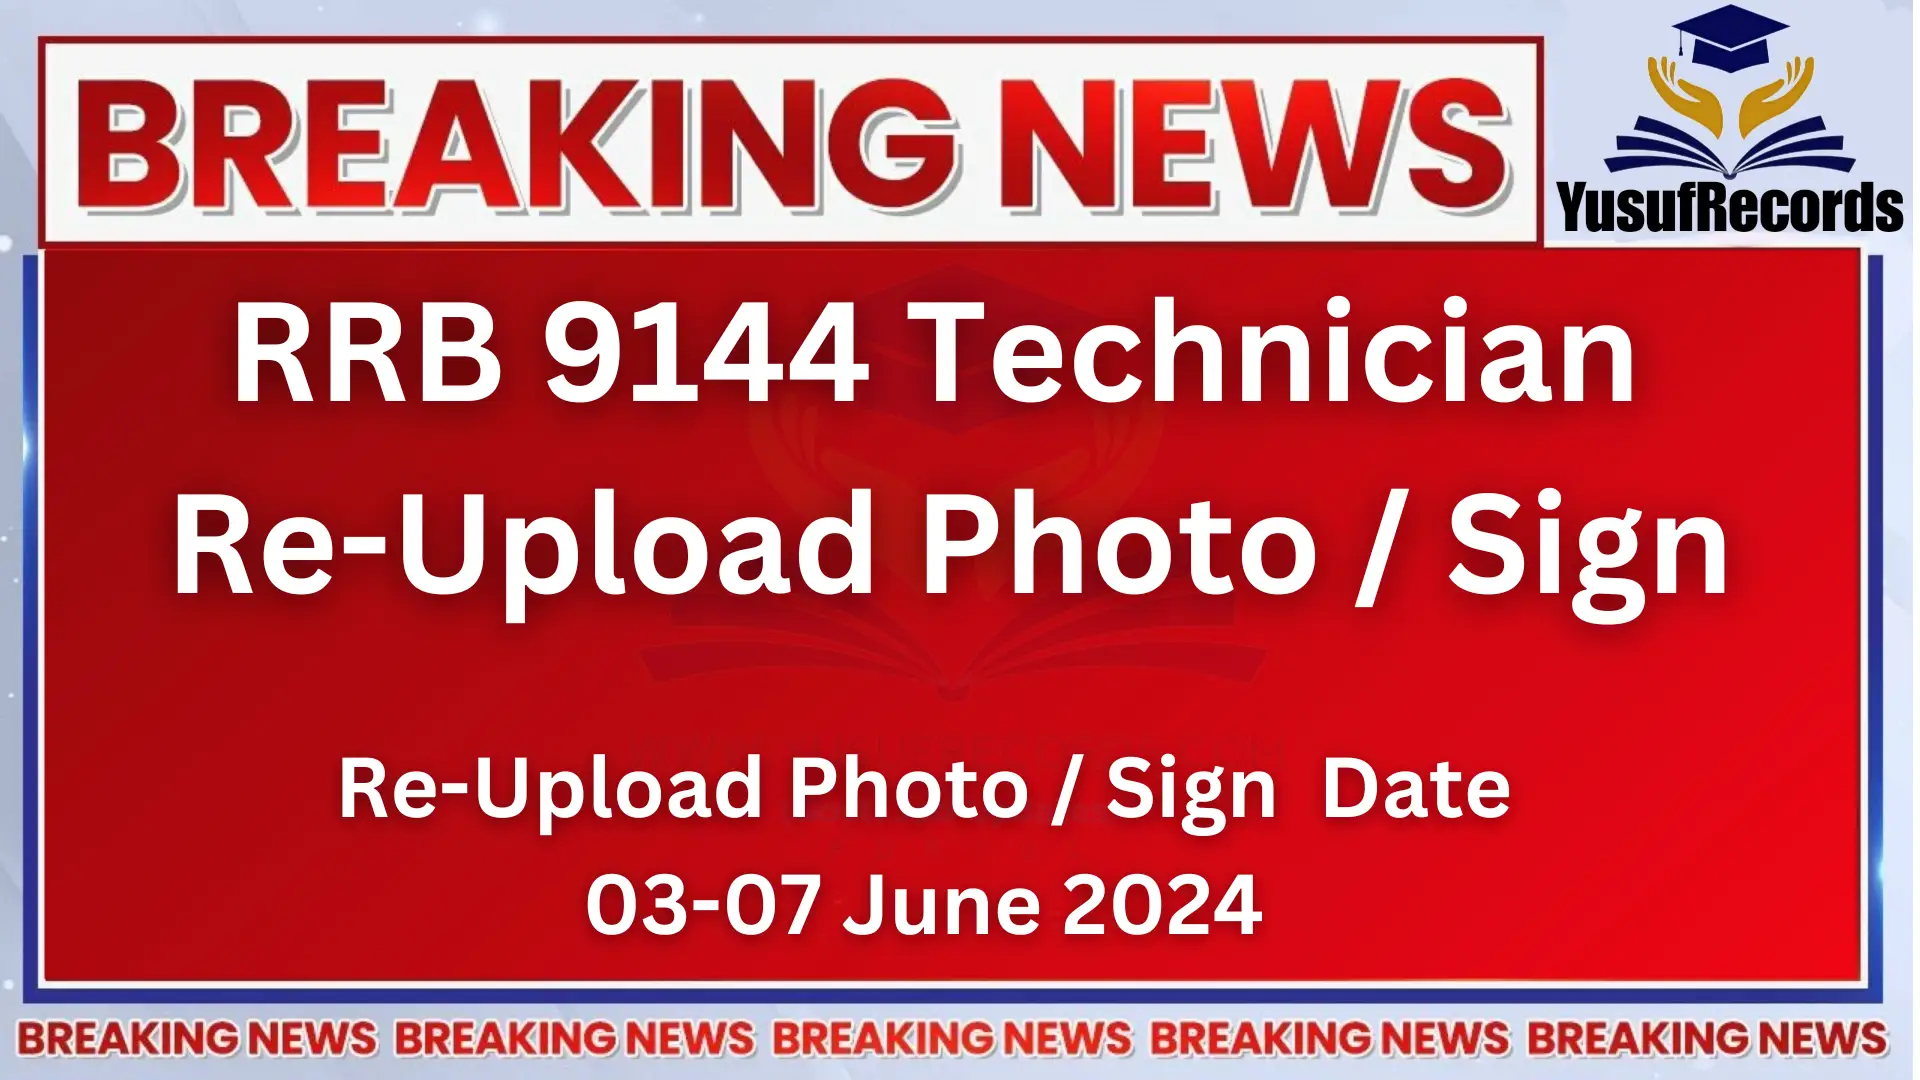 RRB 9144 Technician Re-Upload Photo / Sign